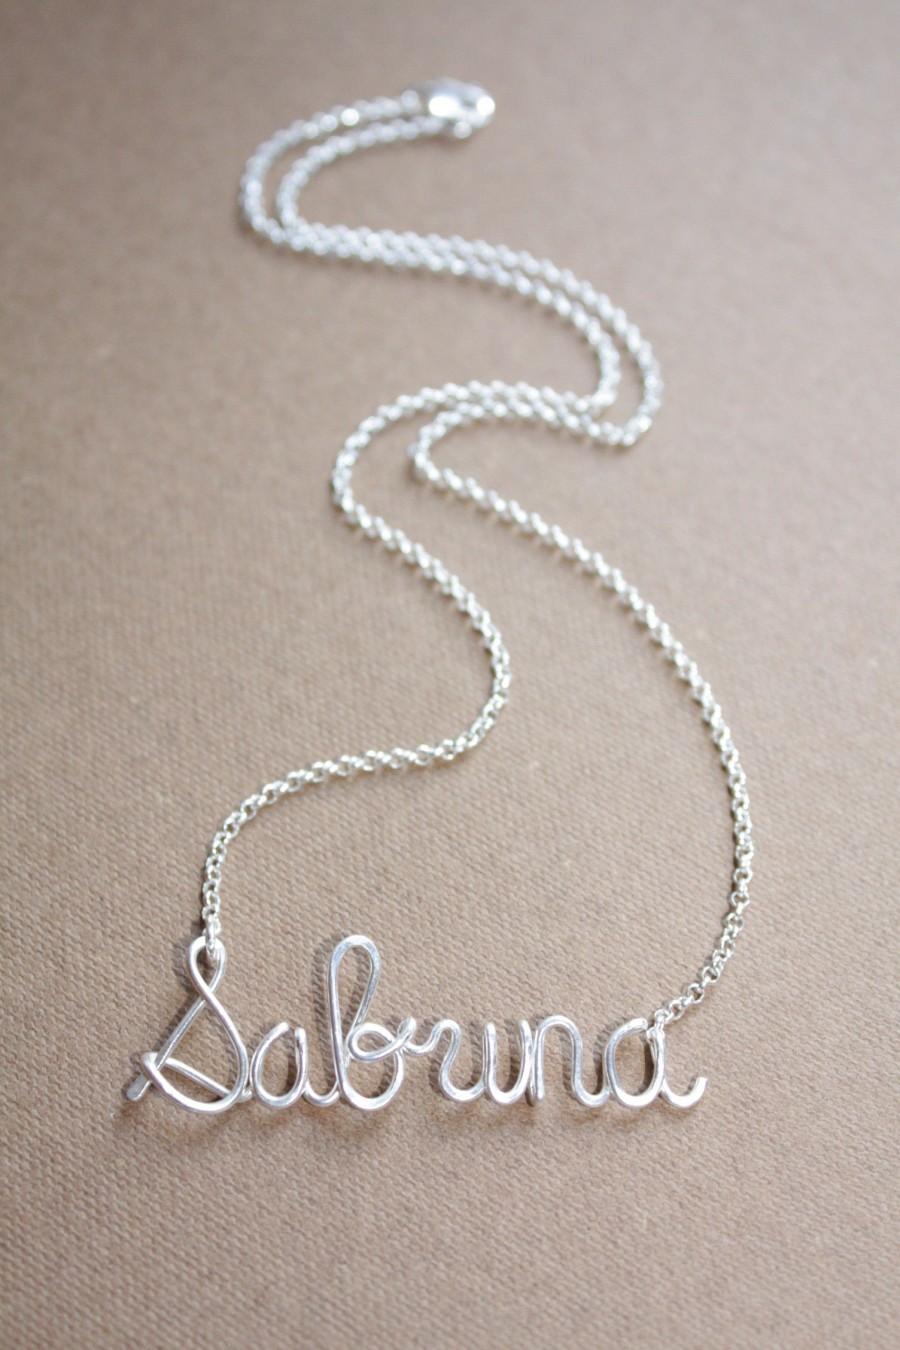 Wedding - Tiny Silver Name Necklace-Personalized Necklace-Name Necklace-Custom Name Necklace-Name Jewelry-Personalized Name Wire Jewelry Di & De